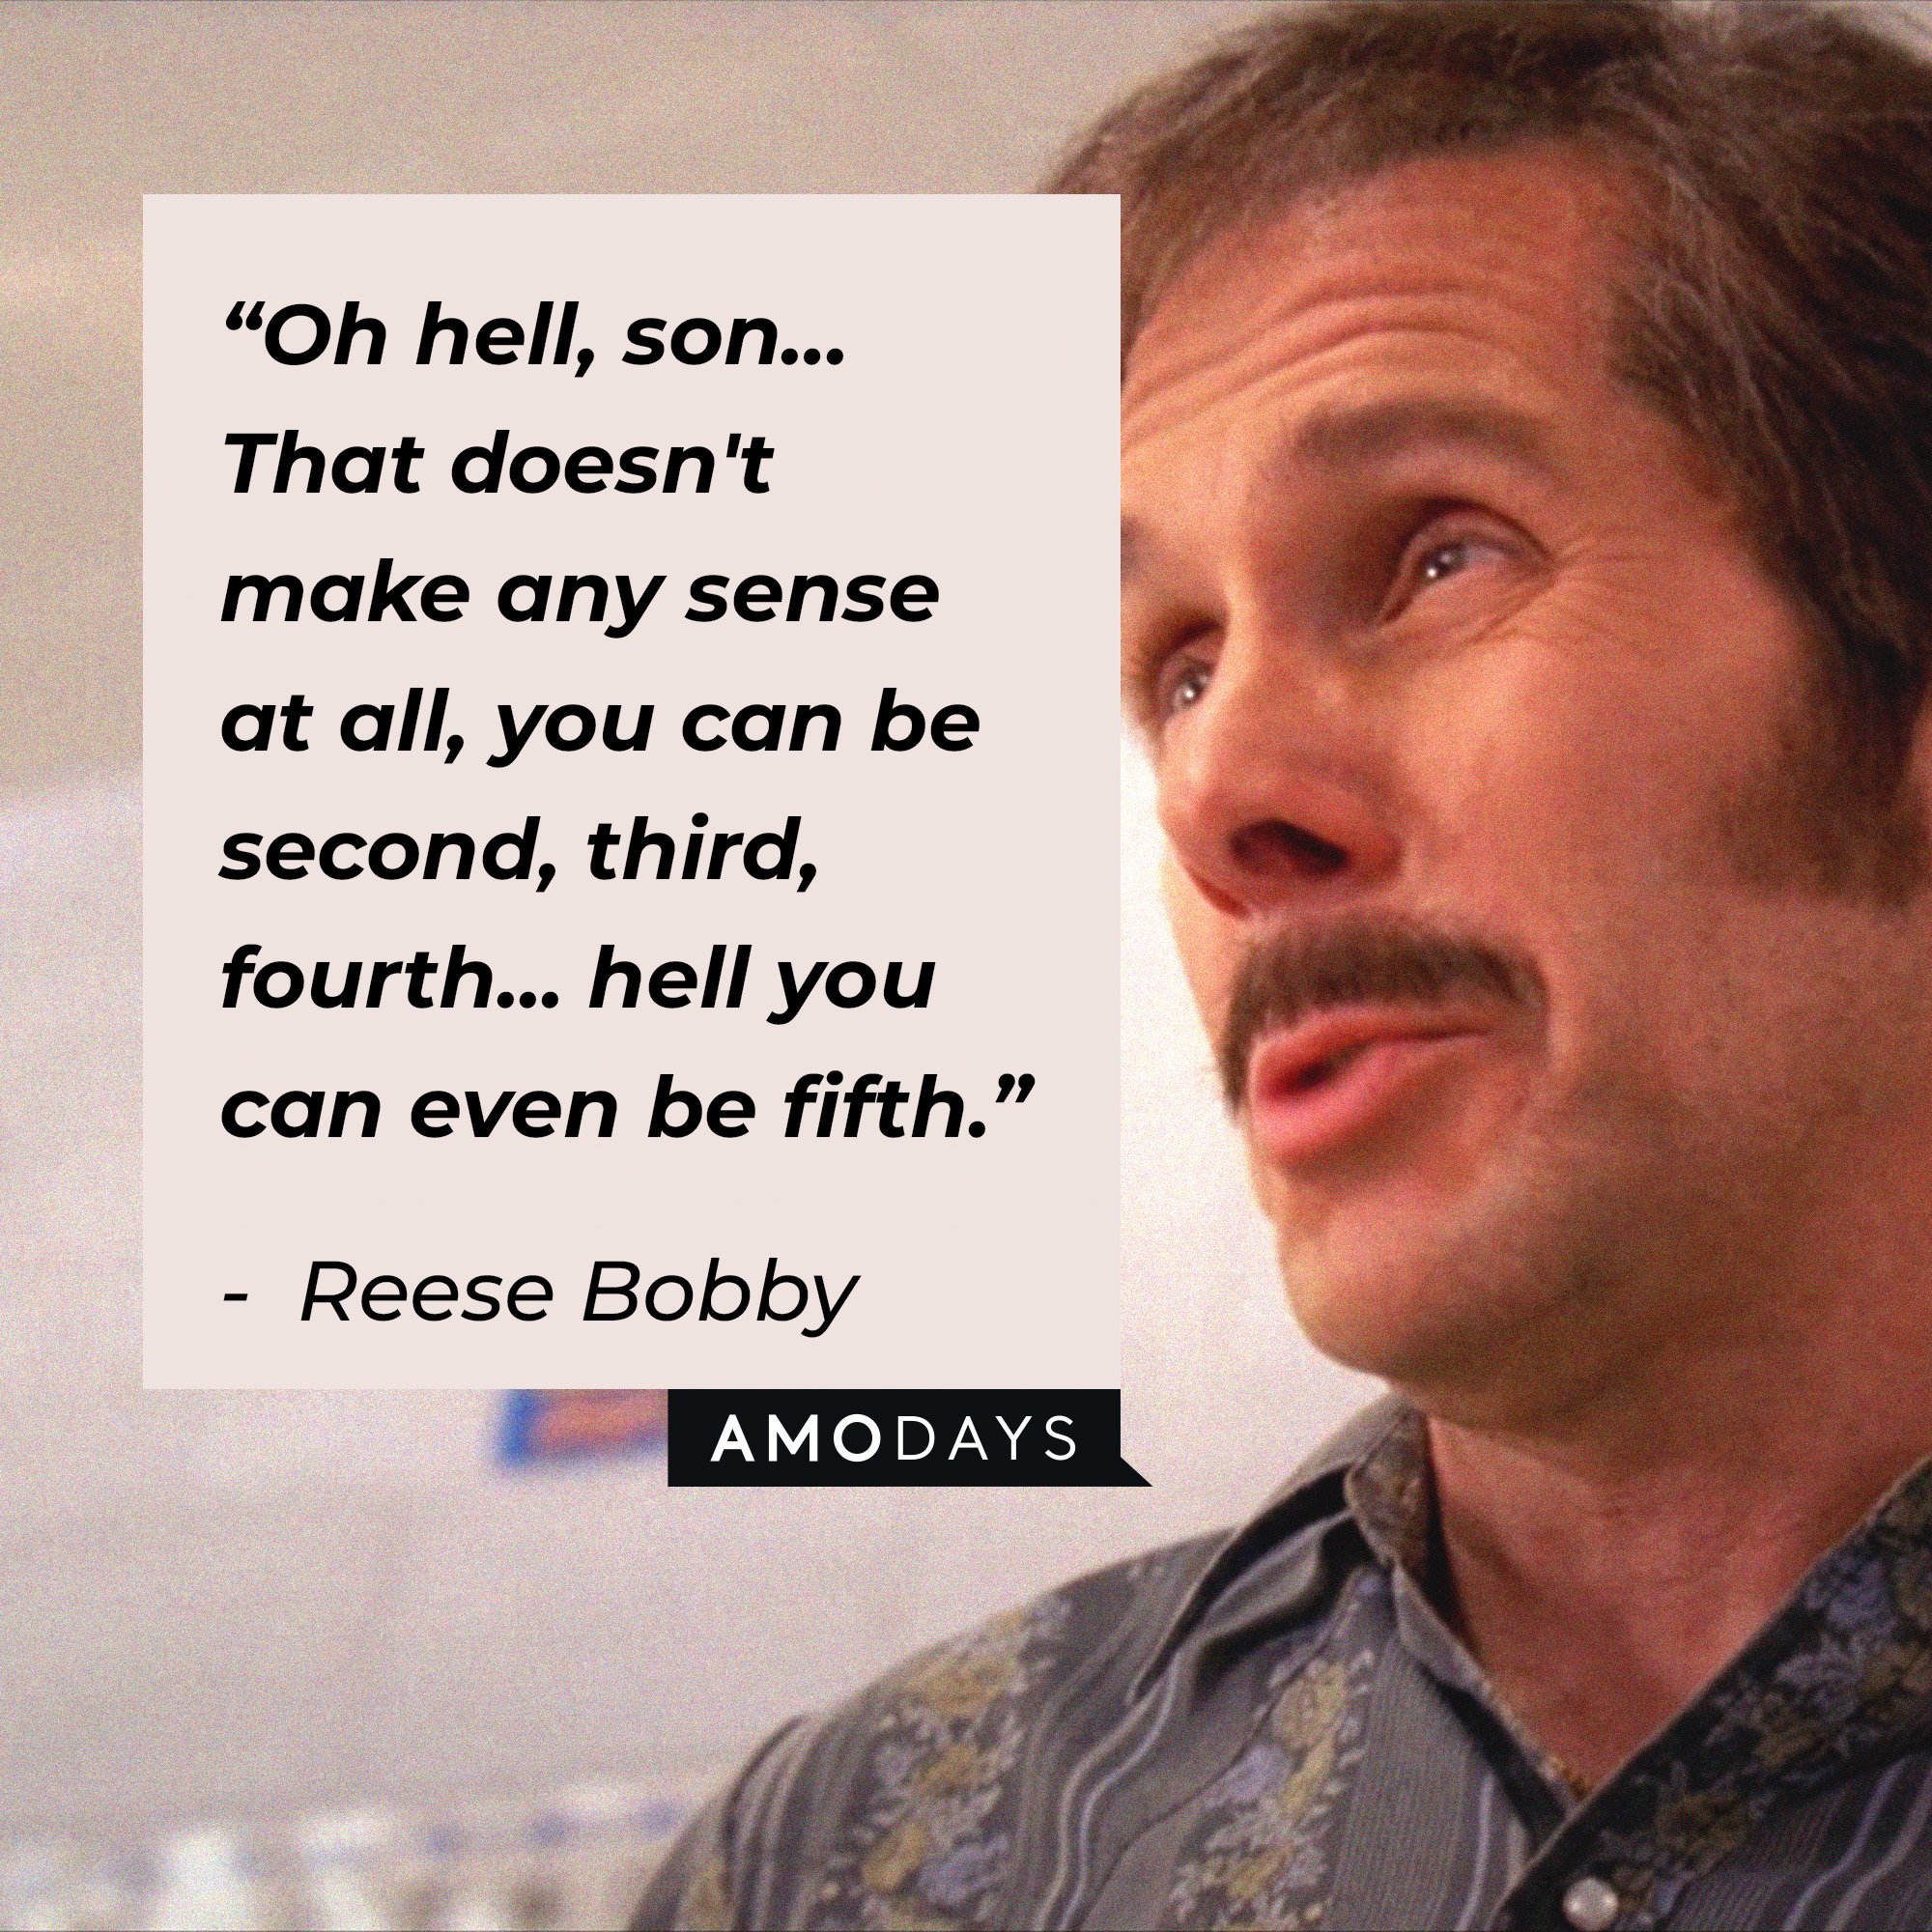 Reese Bobby’s quote: “Oh hell, Son... That doesn't make any sense at all, you can be second, third...  hell you can even be fifth." | Image: AmoDays